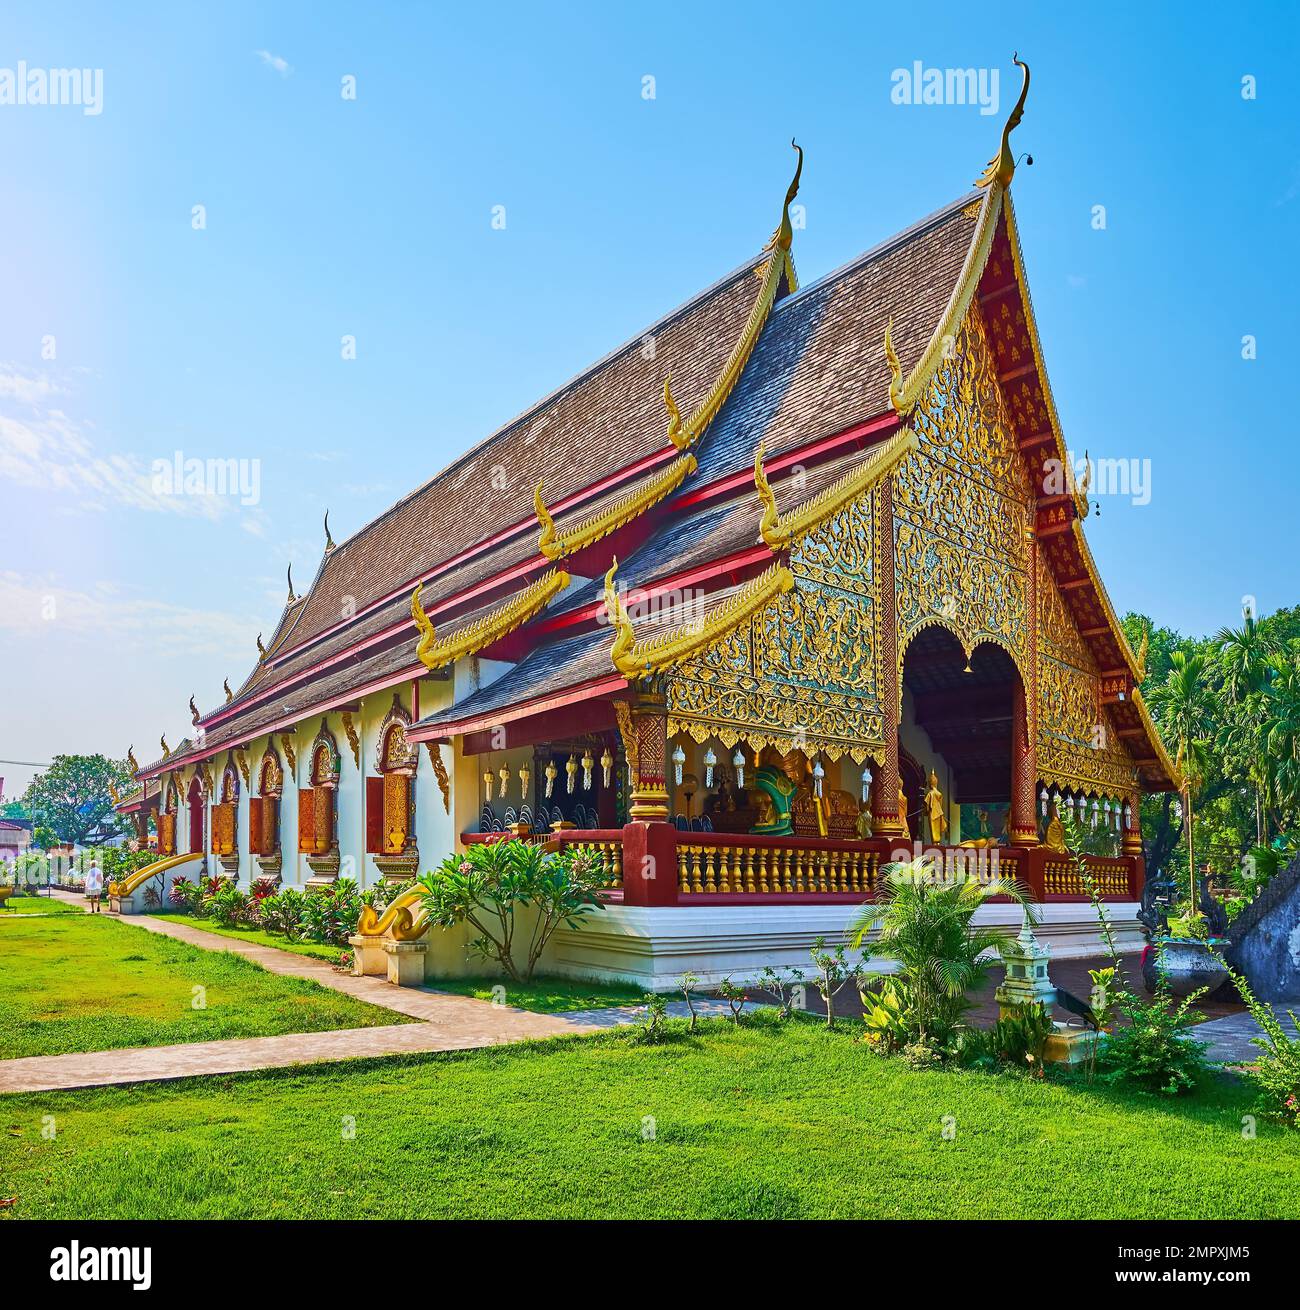 The richly decorated Viharn of Wat Chiang Man temple with gilt ornaments, pyathat roof with carved wooden bargeboards, Naga serpents on chofas, Chiang Stock Photo